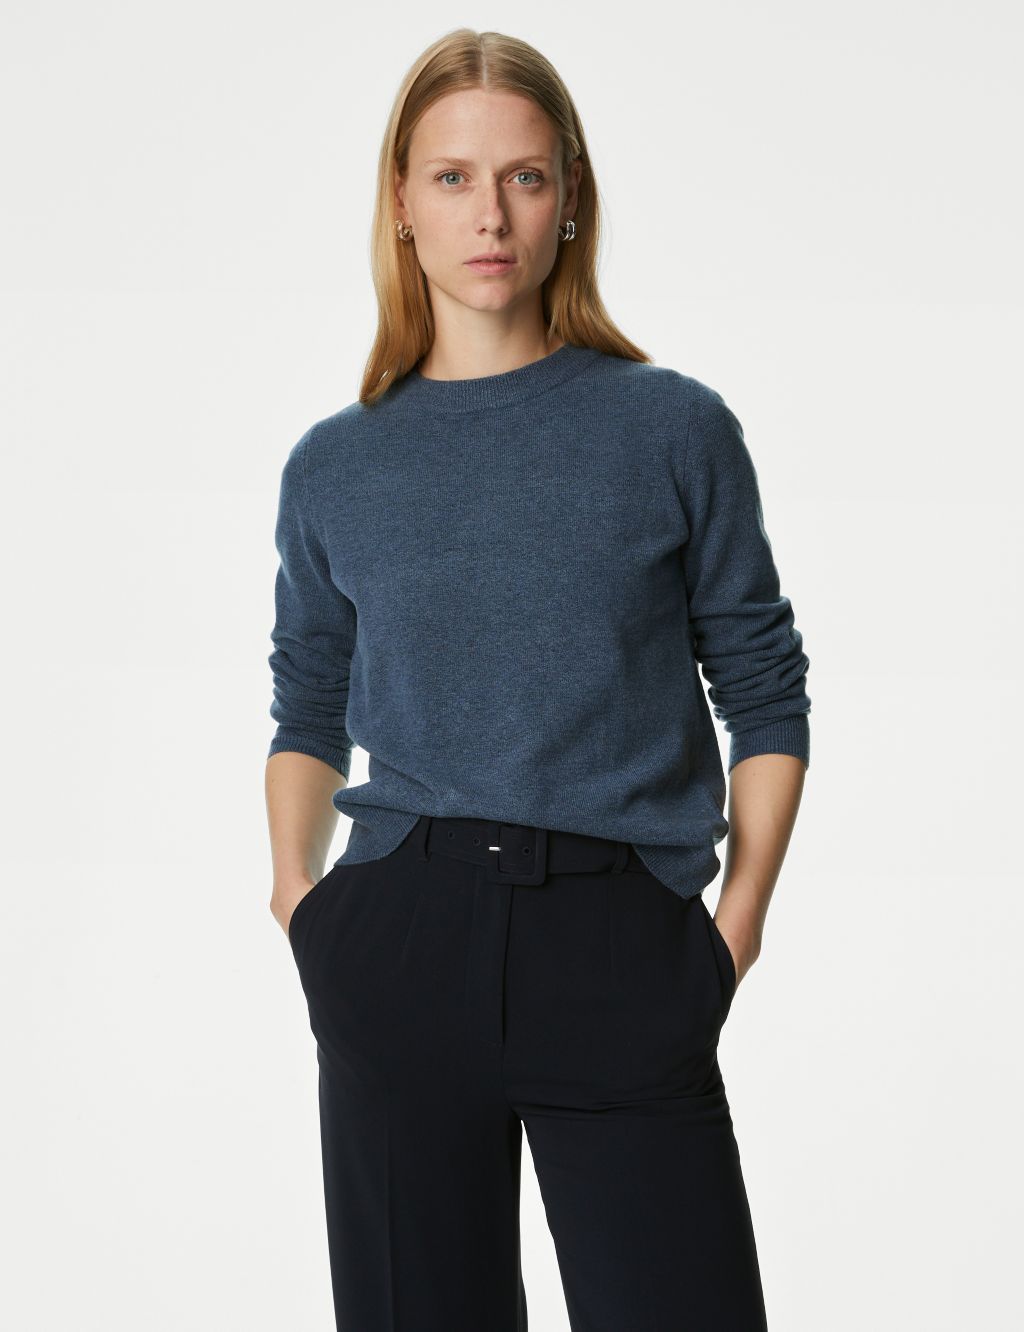 Recycled Blend Crew Neck Jumper image 4